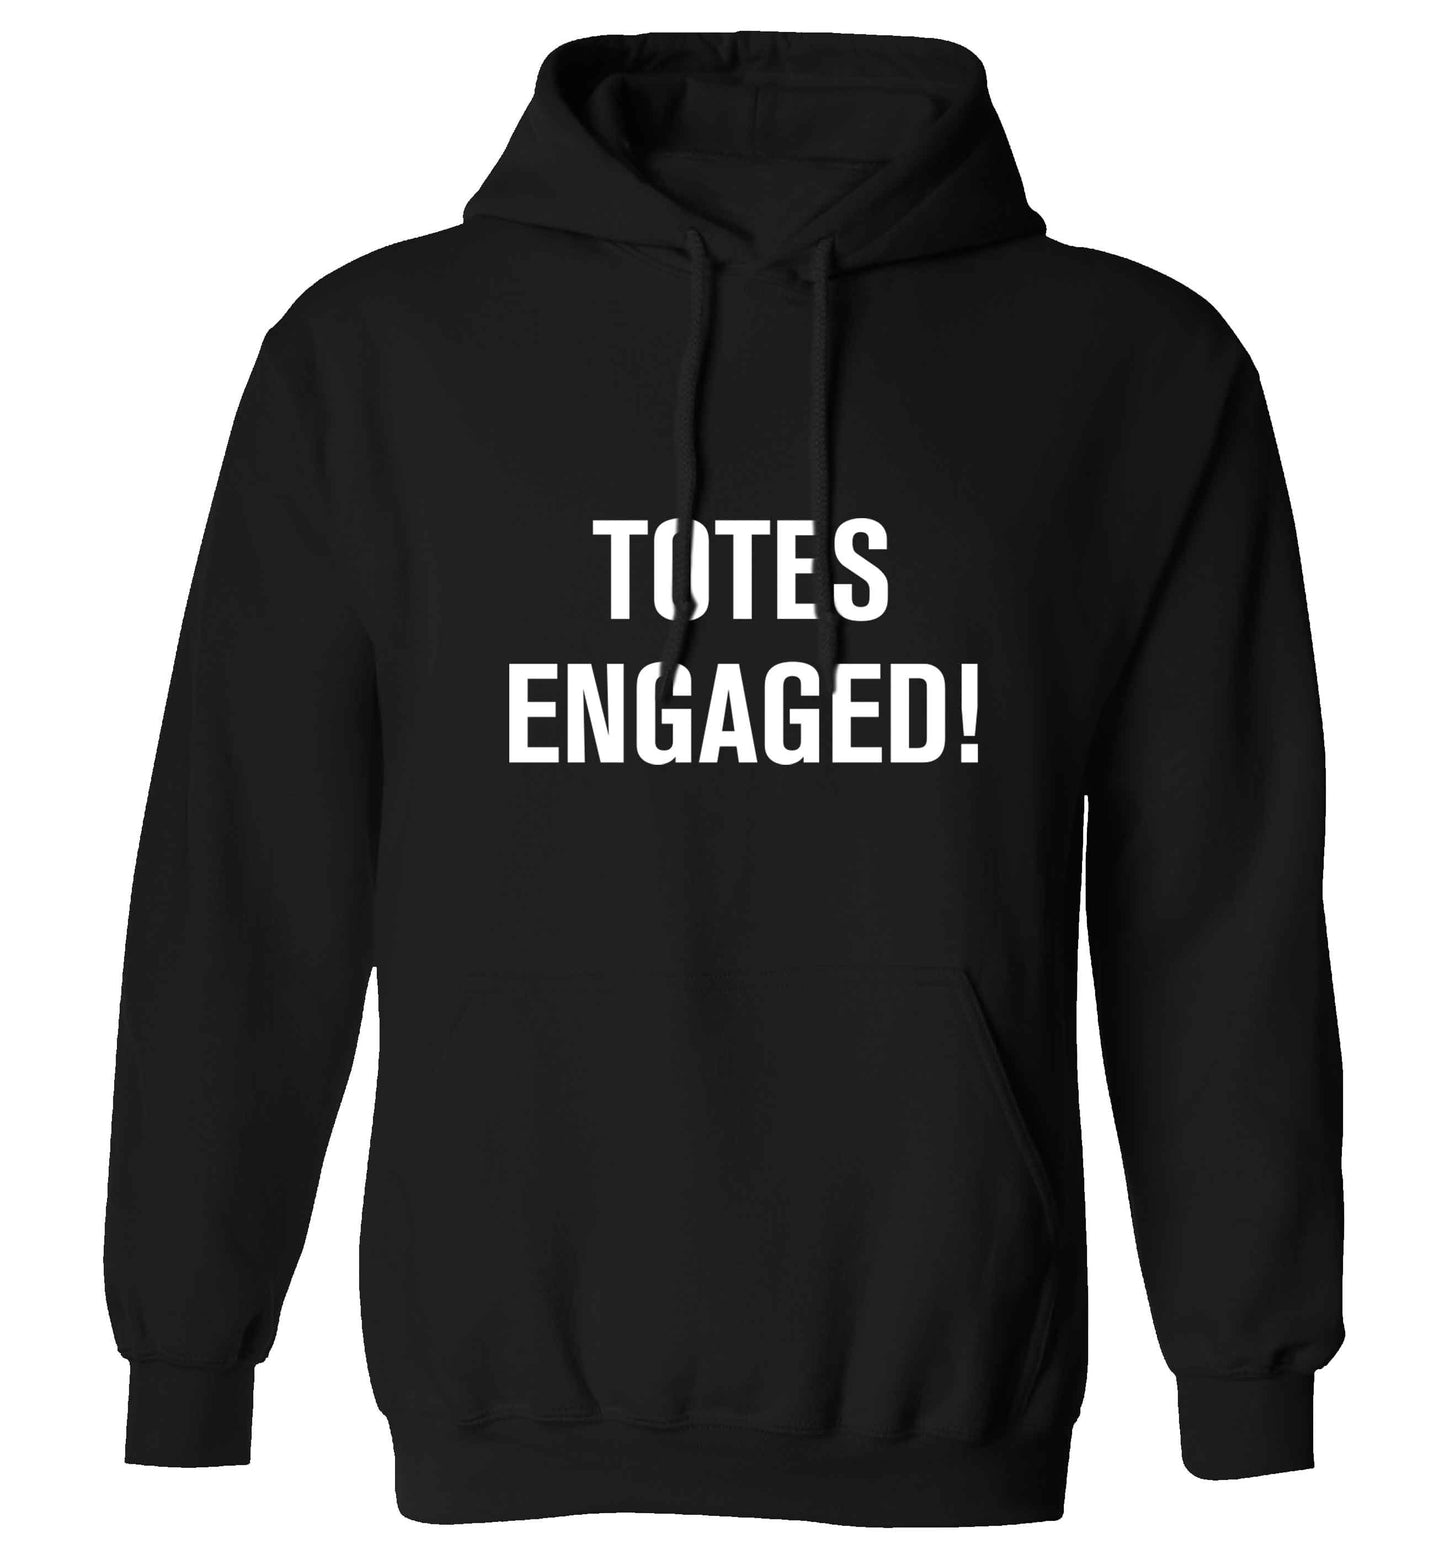 Totes engaged adults unisex black hoodie 2XL